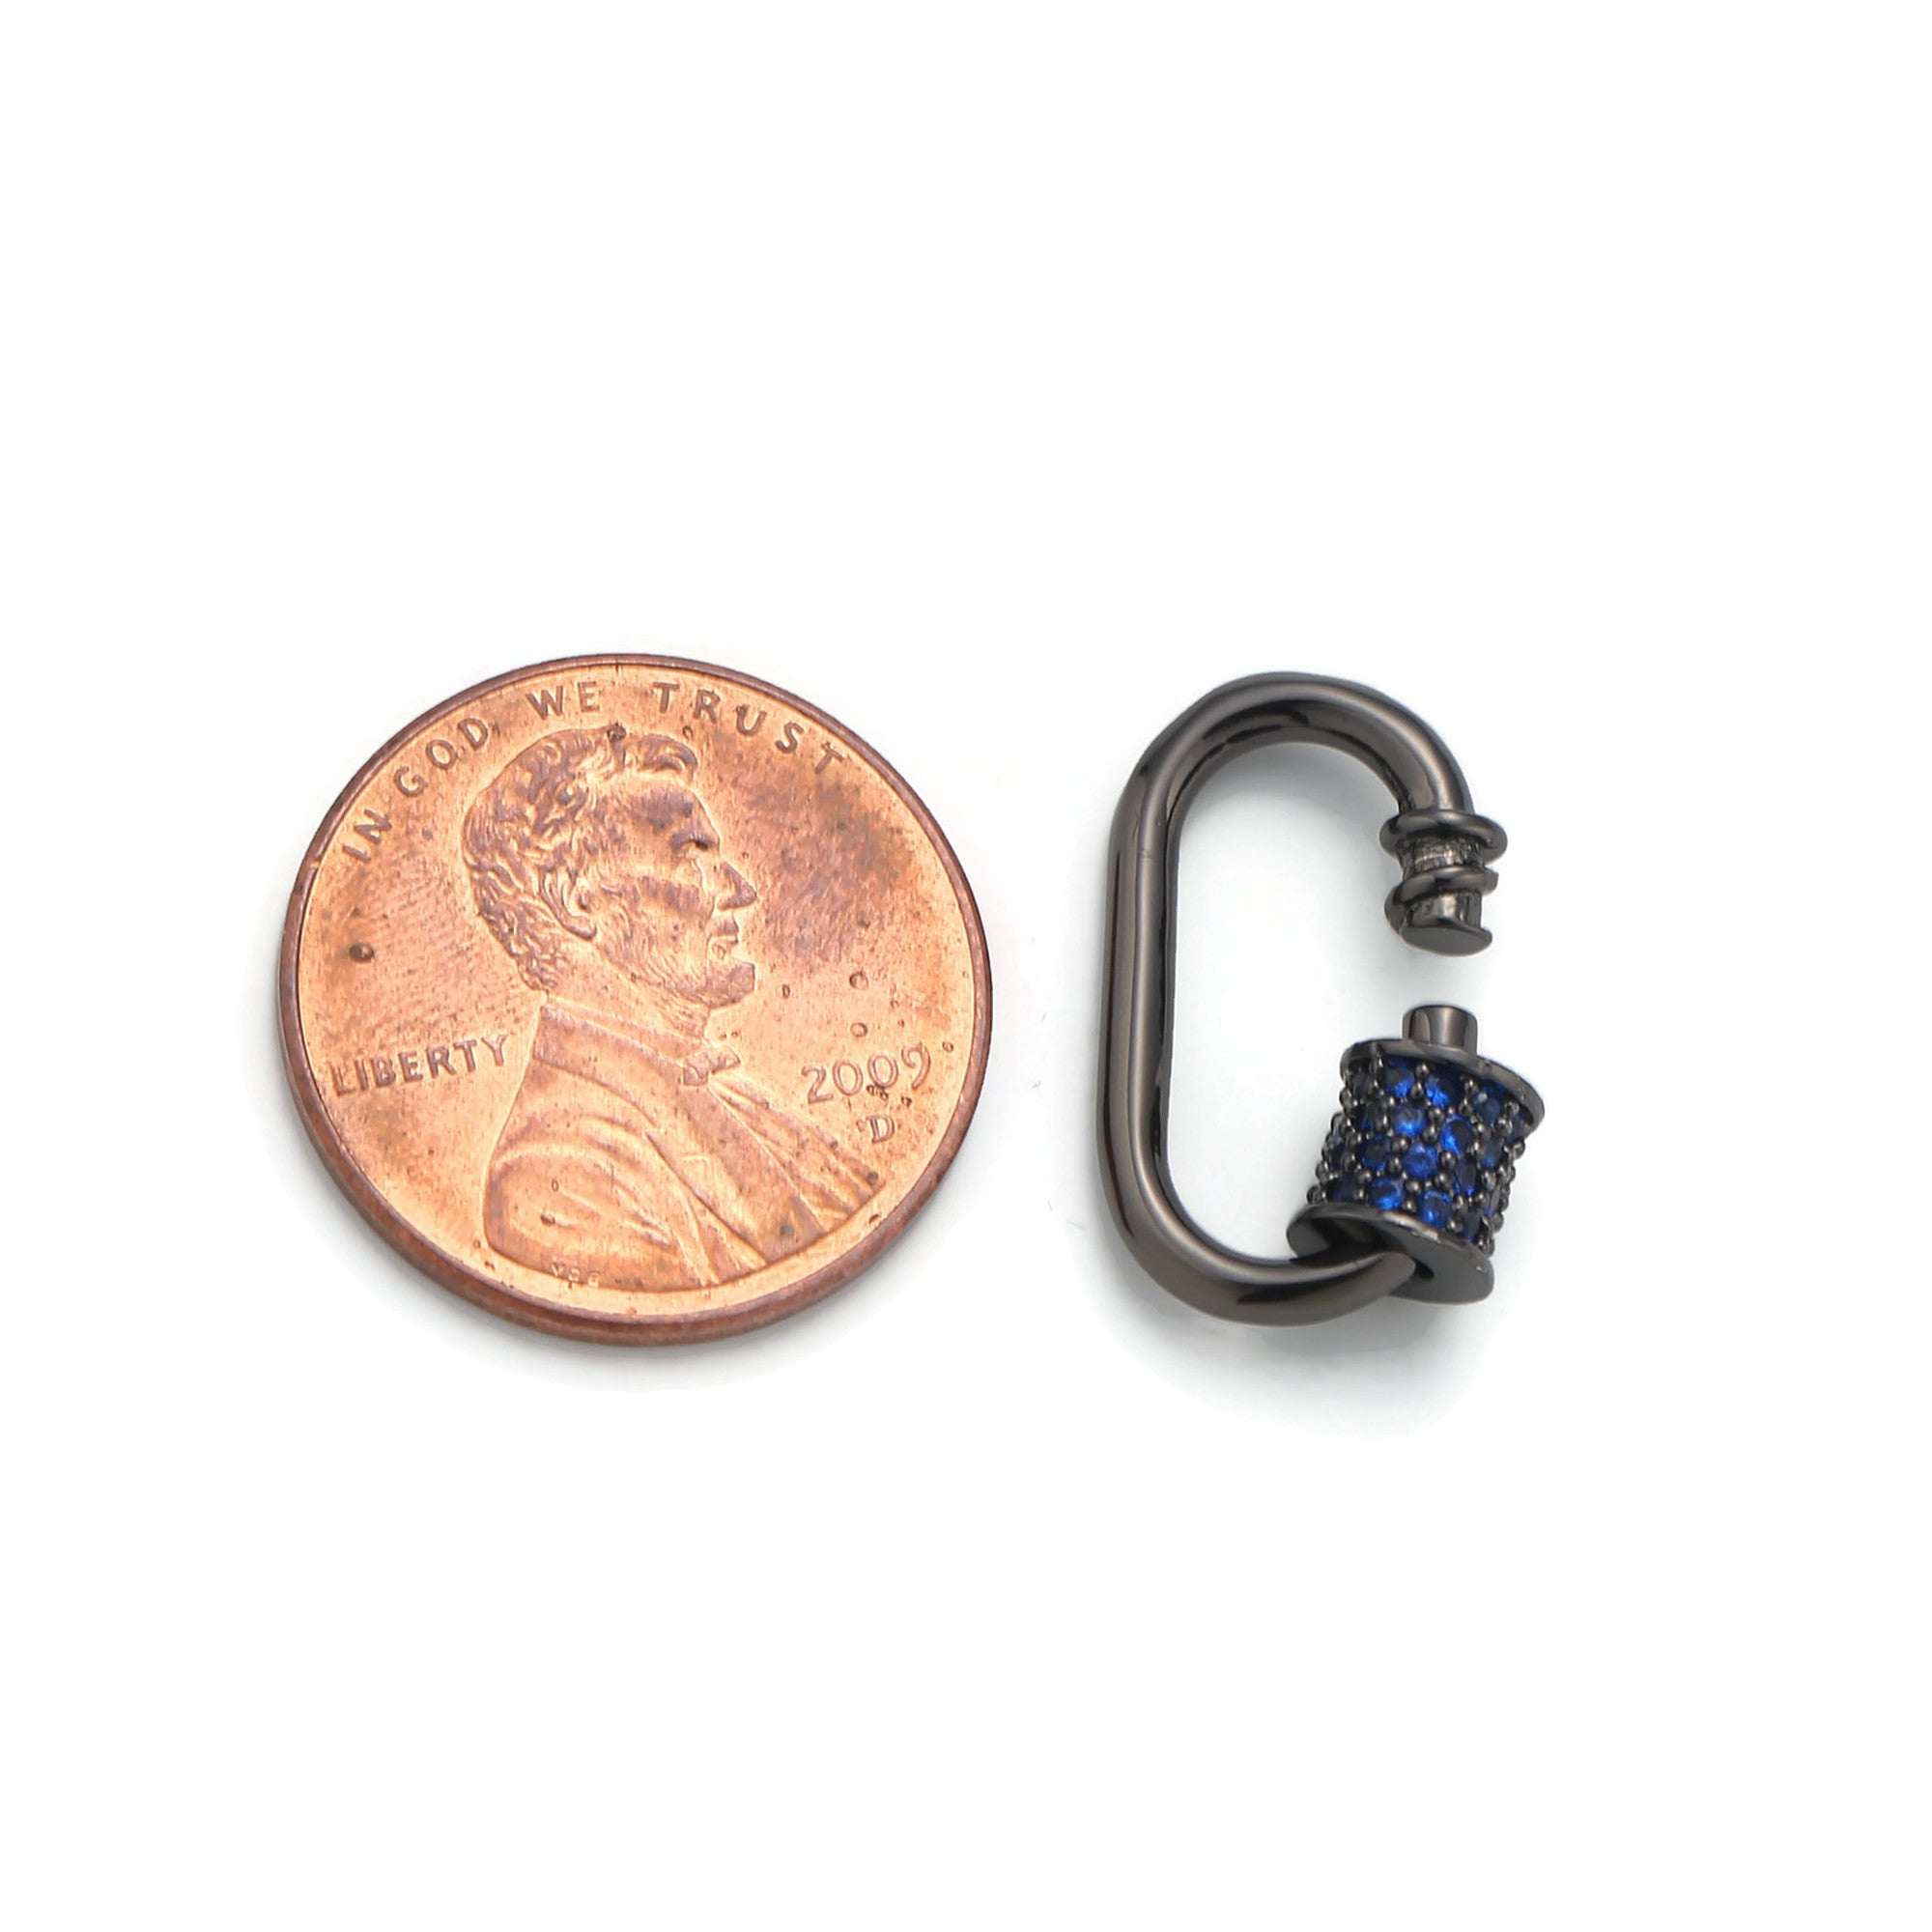 Black Paperclip Carabiner, Circle Screw Clasp with Black or Blue Rhinestones - DLUXCA